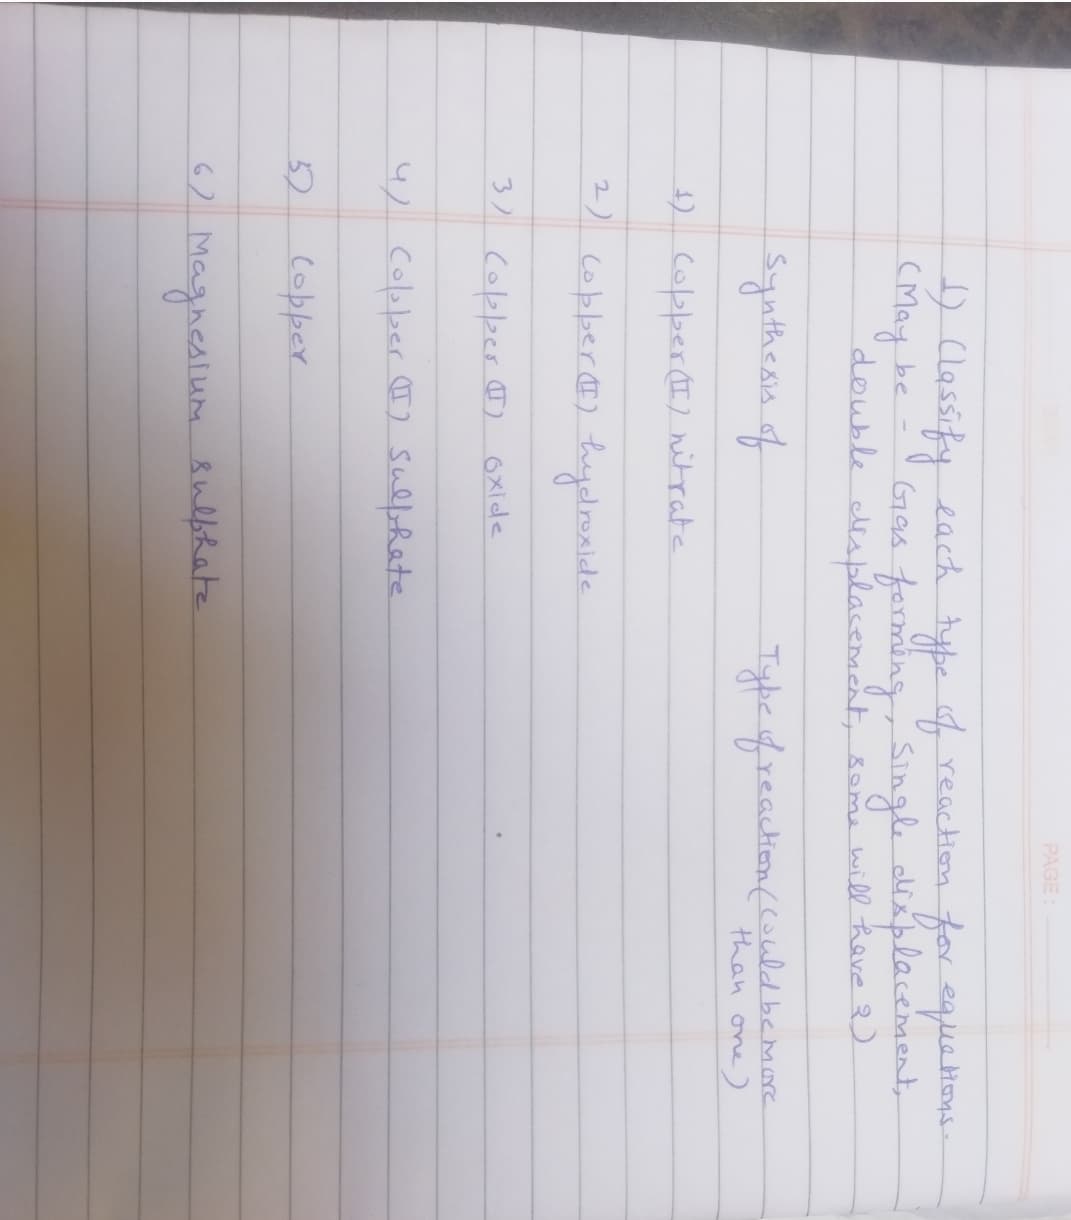 1) Classify each type of reaction for equations.
(May be
Gas forming, Single displacement,
double displacement, some will have 2)
Synthesis of
+) Copper (I) nitrate
2) (opper (I) hydroxide
Copper (1)
3)
4) Copper (I) sulphate
32
oxide
Copper
PAGE:
6) Magnesium sulphate
Type of reaction (could be more
than one)